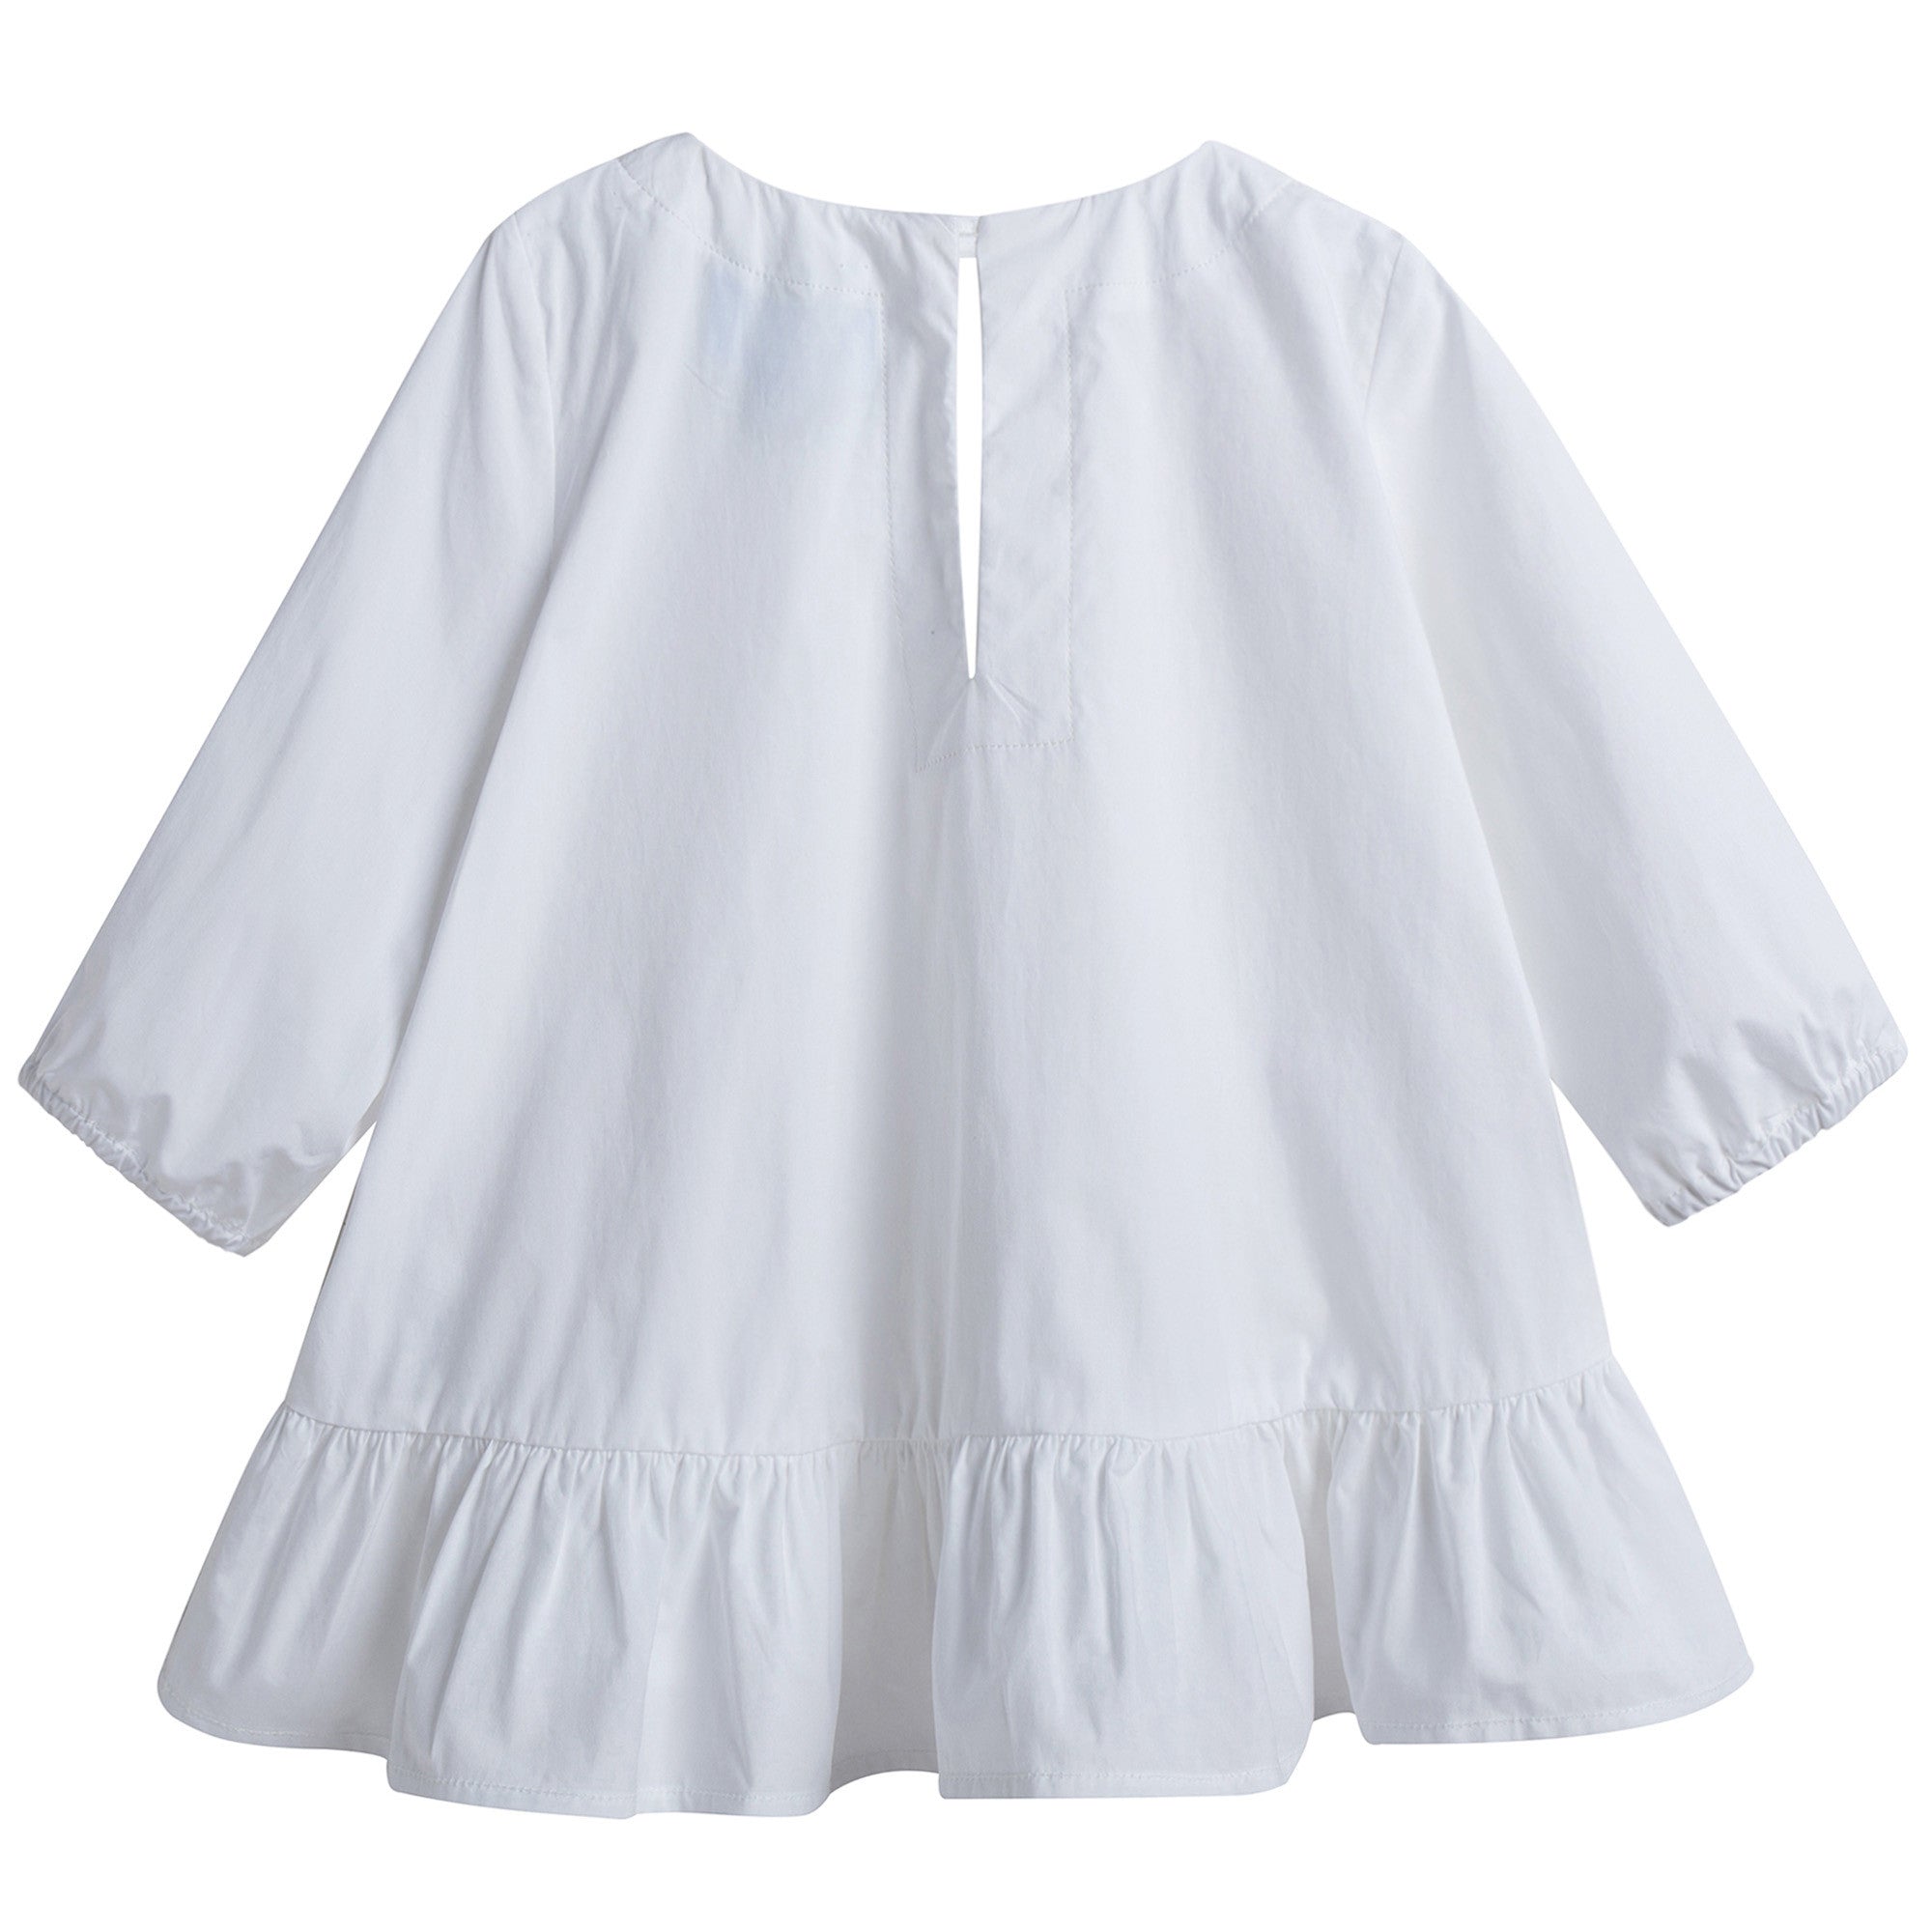 Girls White Cotton Top With Flounces